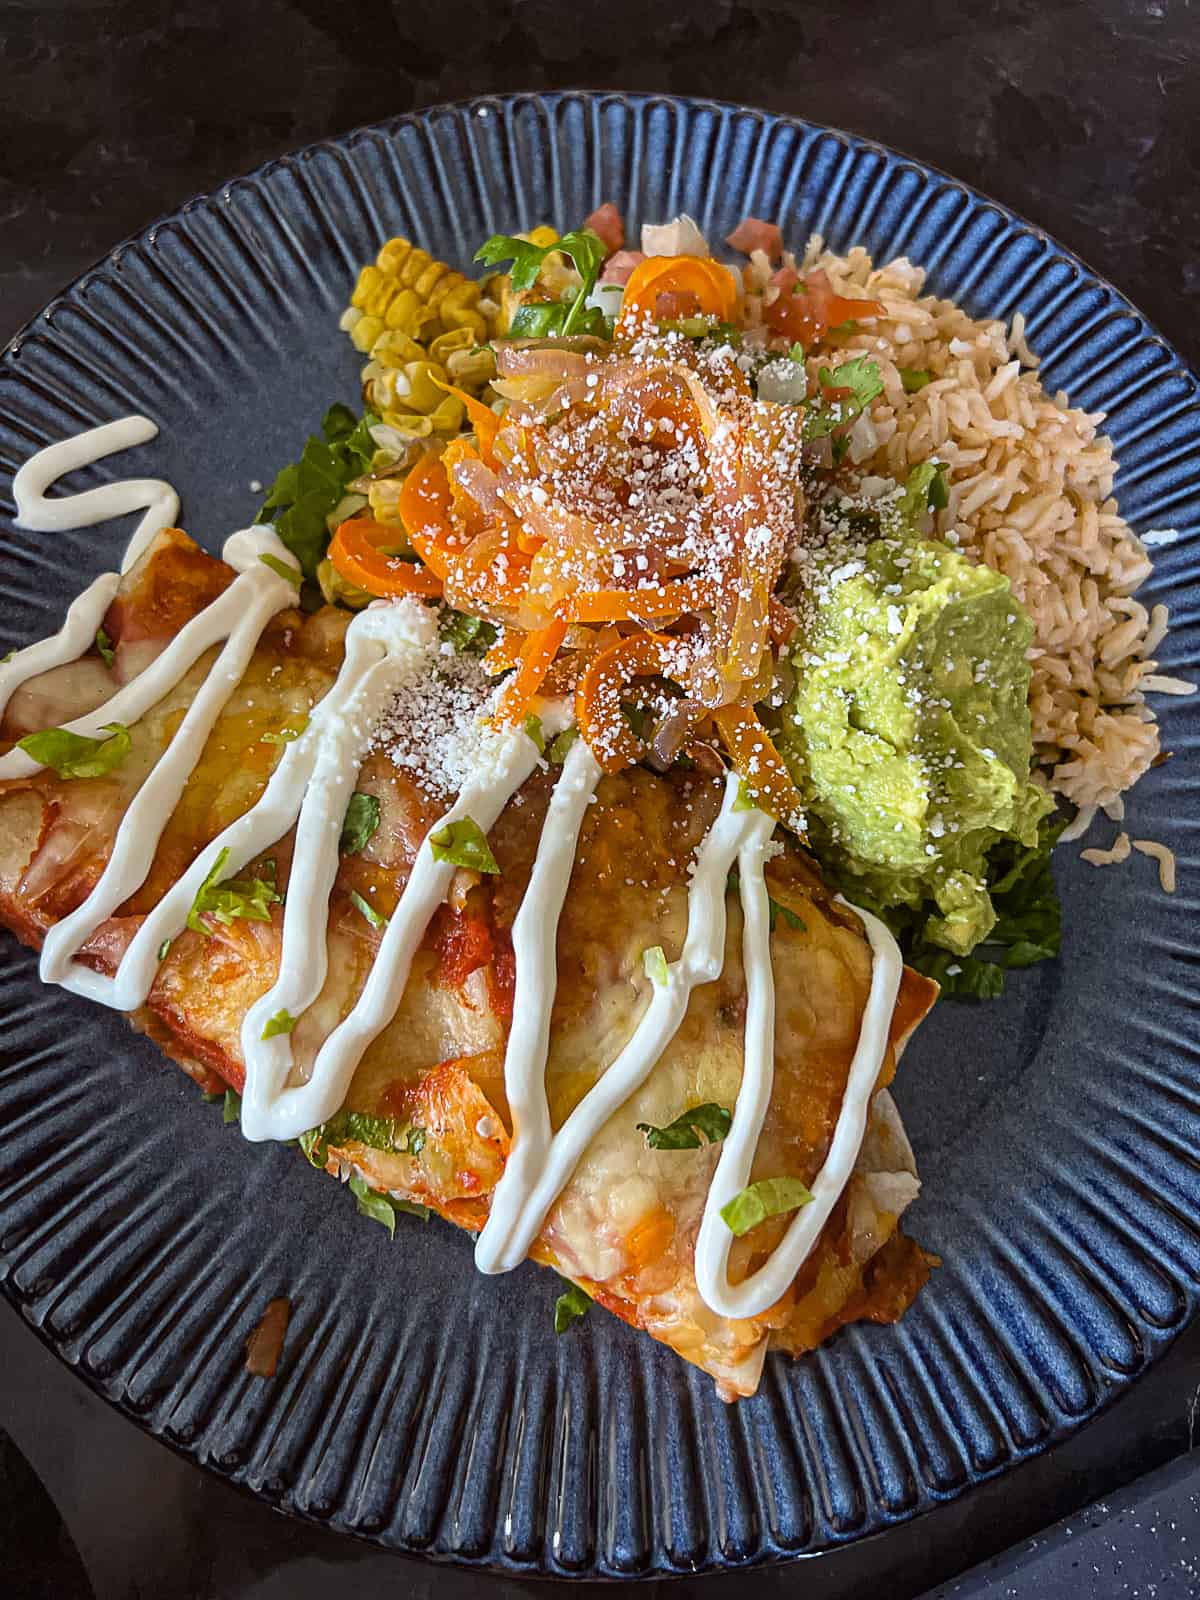 Closeup of Chicken Enchiladas with sides including rice and guacamole on a dinner plate